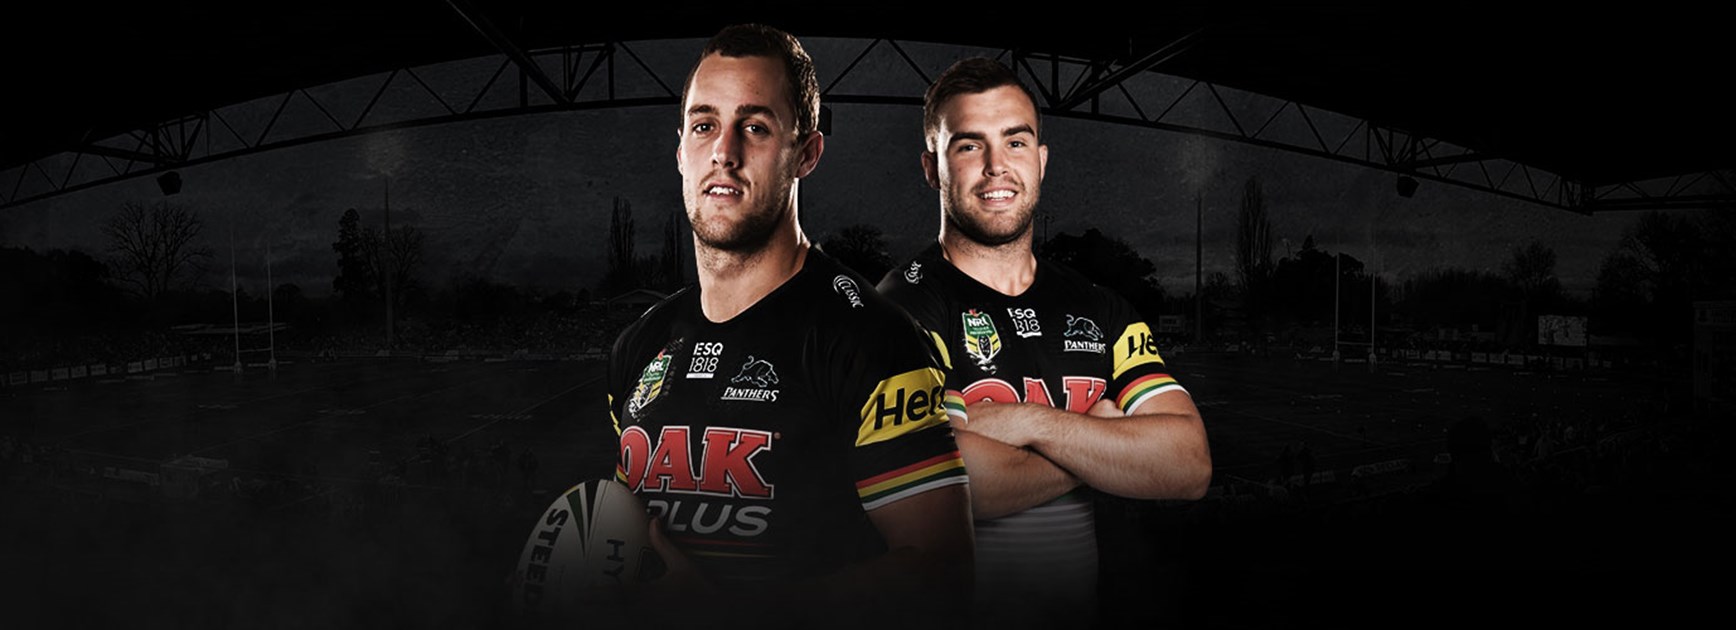 Panthers confirms NRL game in Bathurst